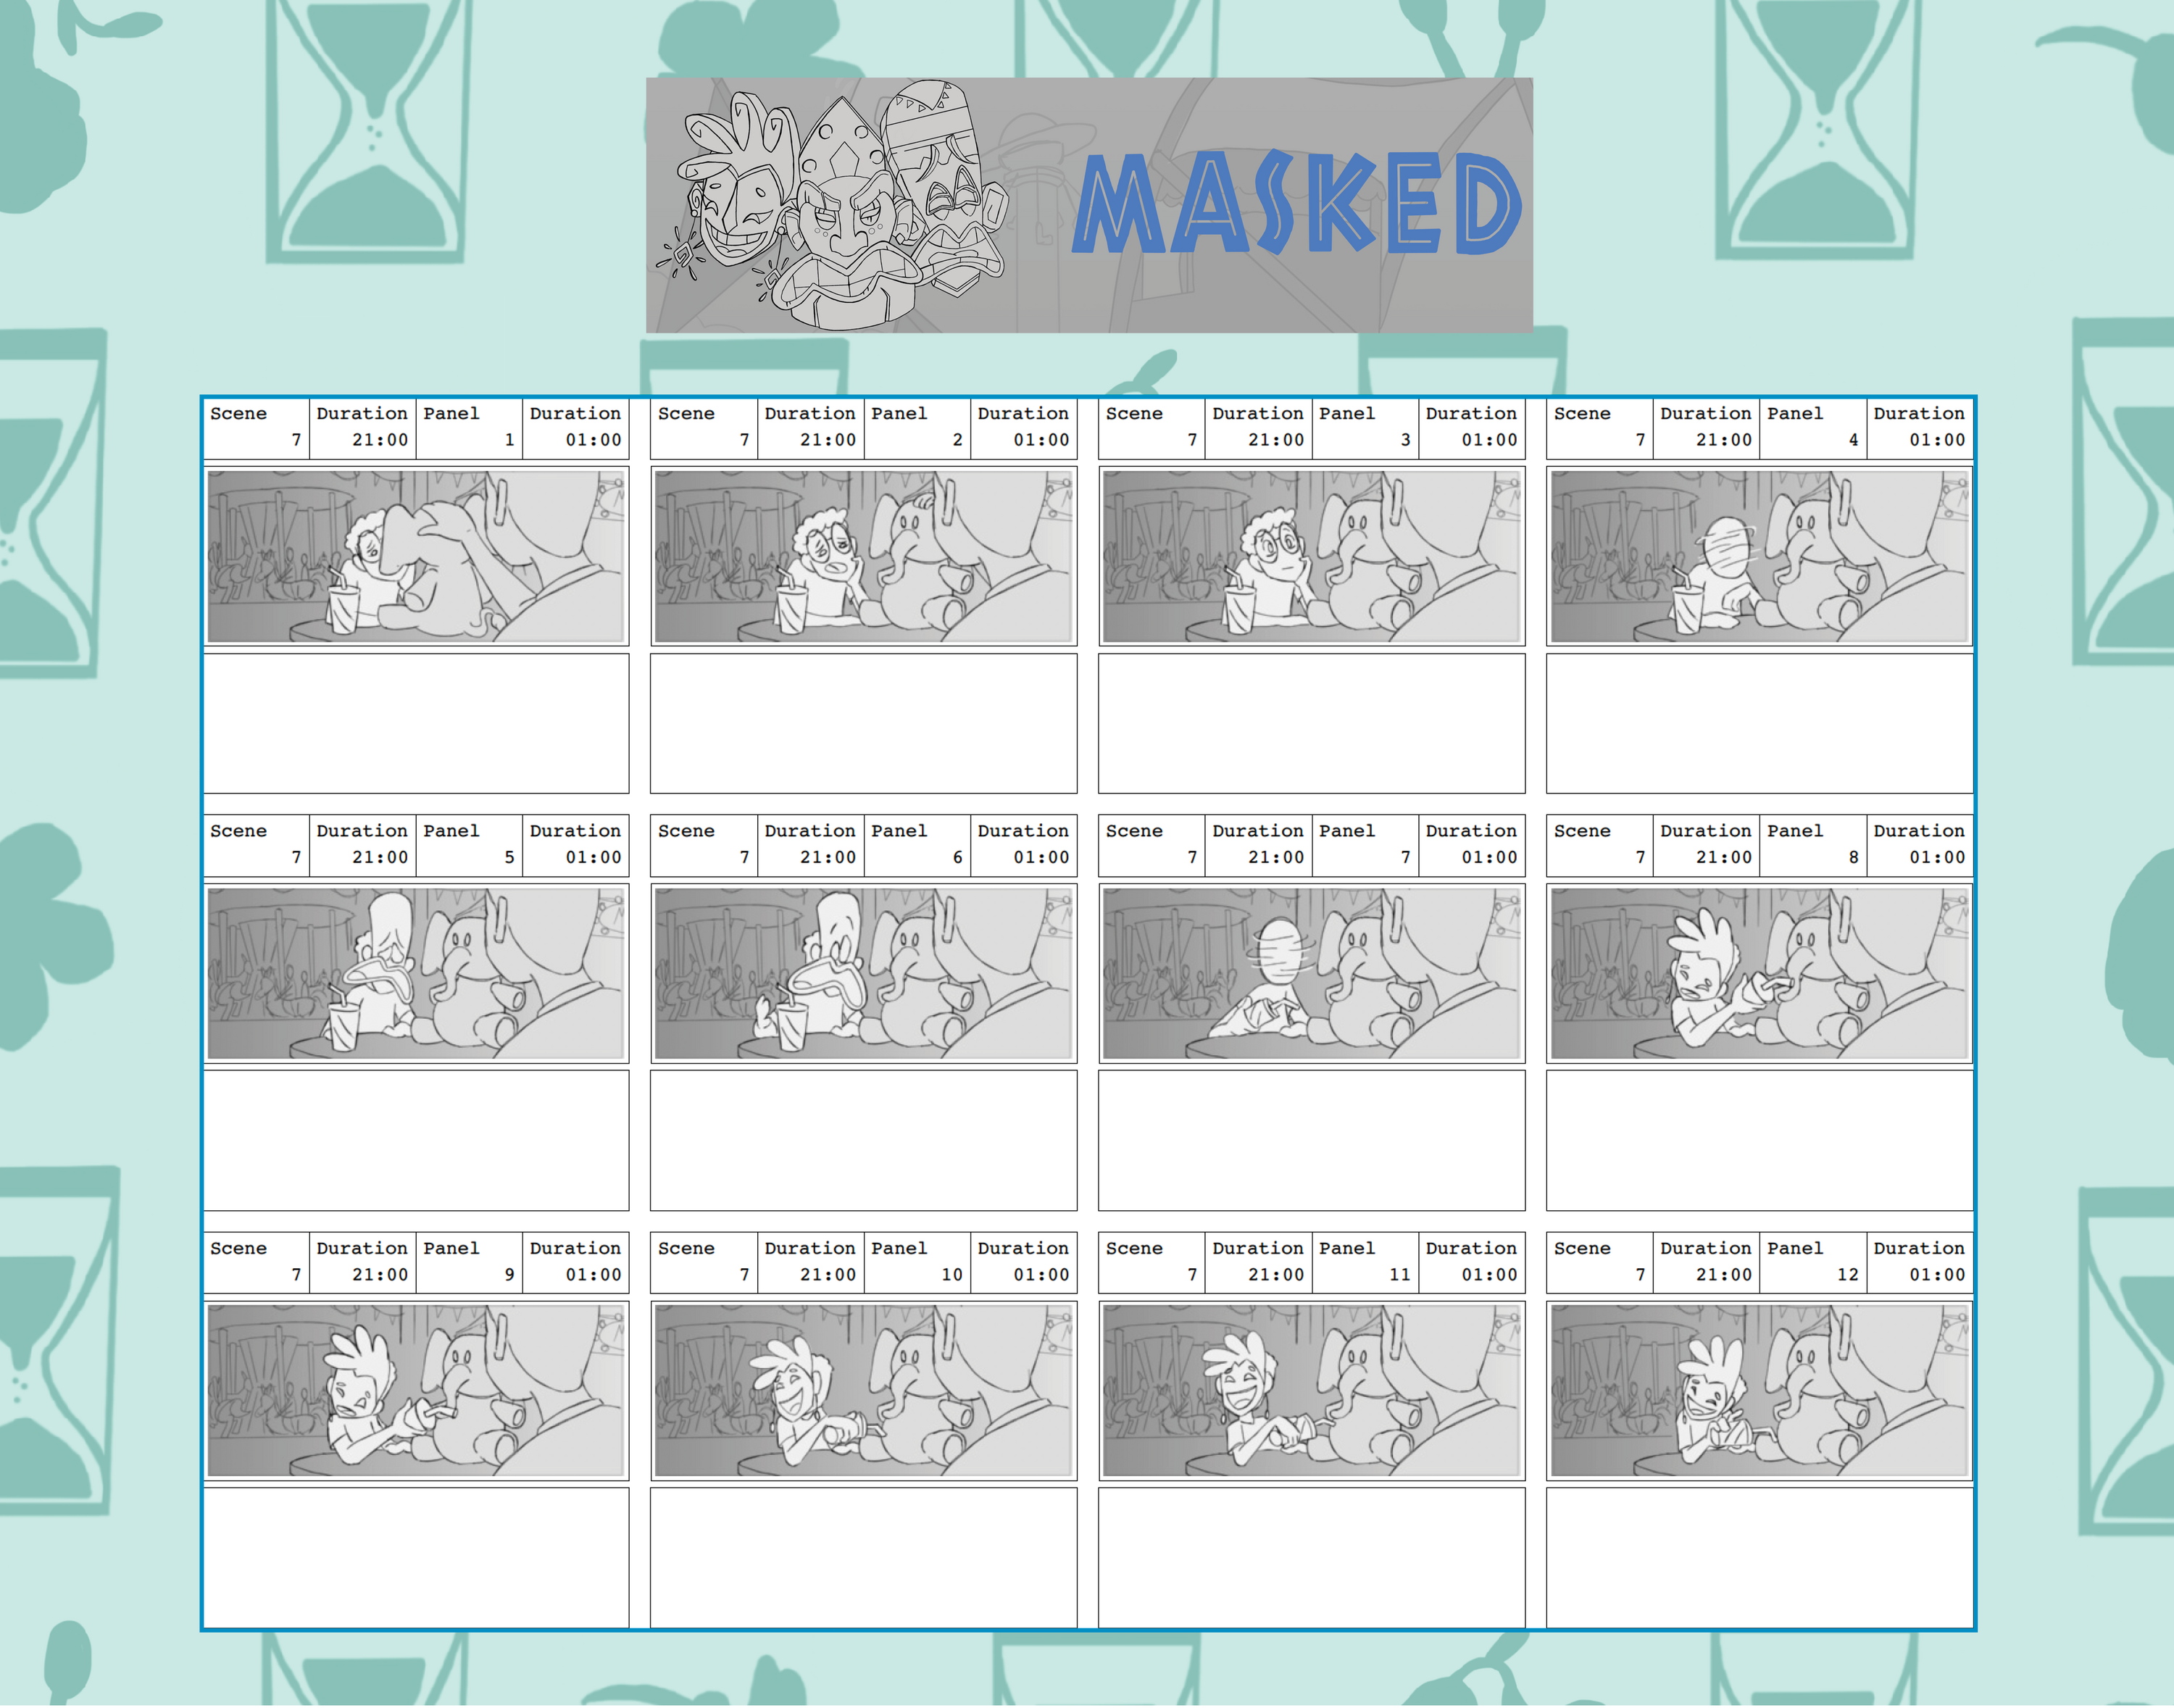 A panel sequence from my storyboard, Masked.